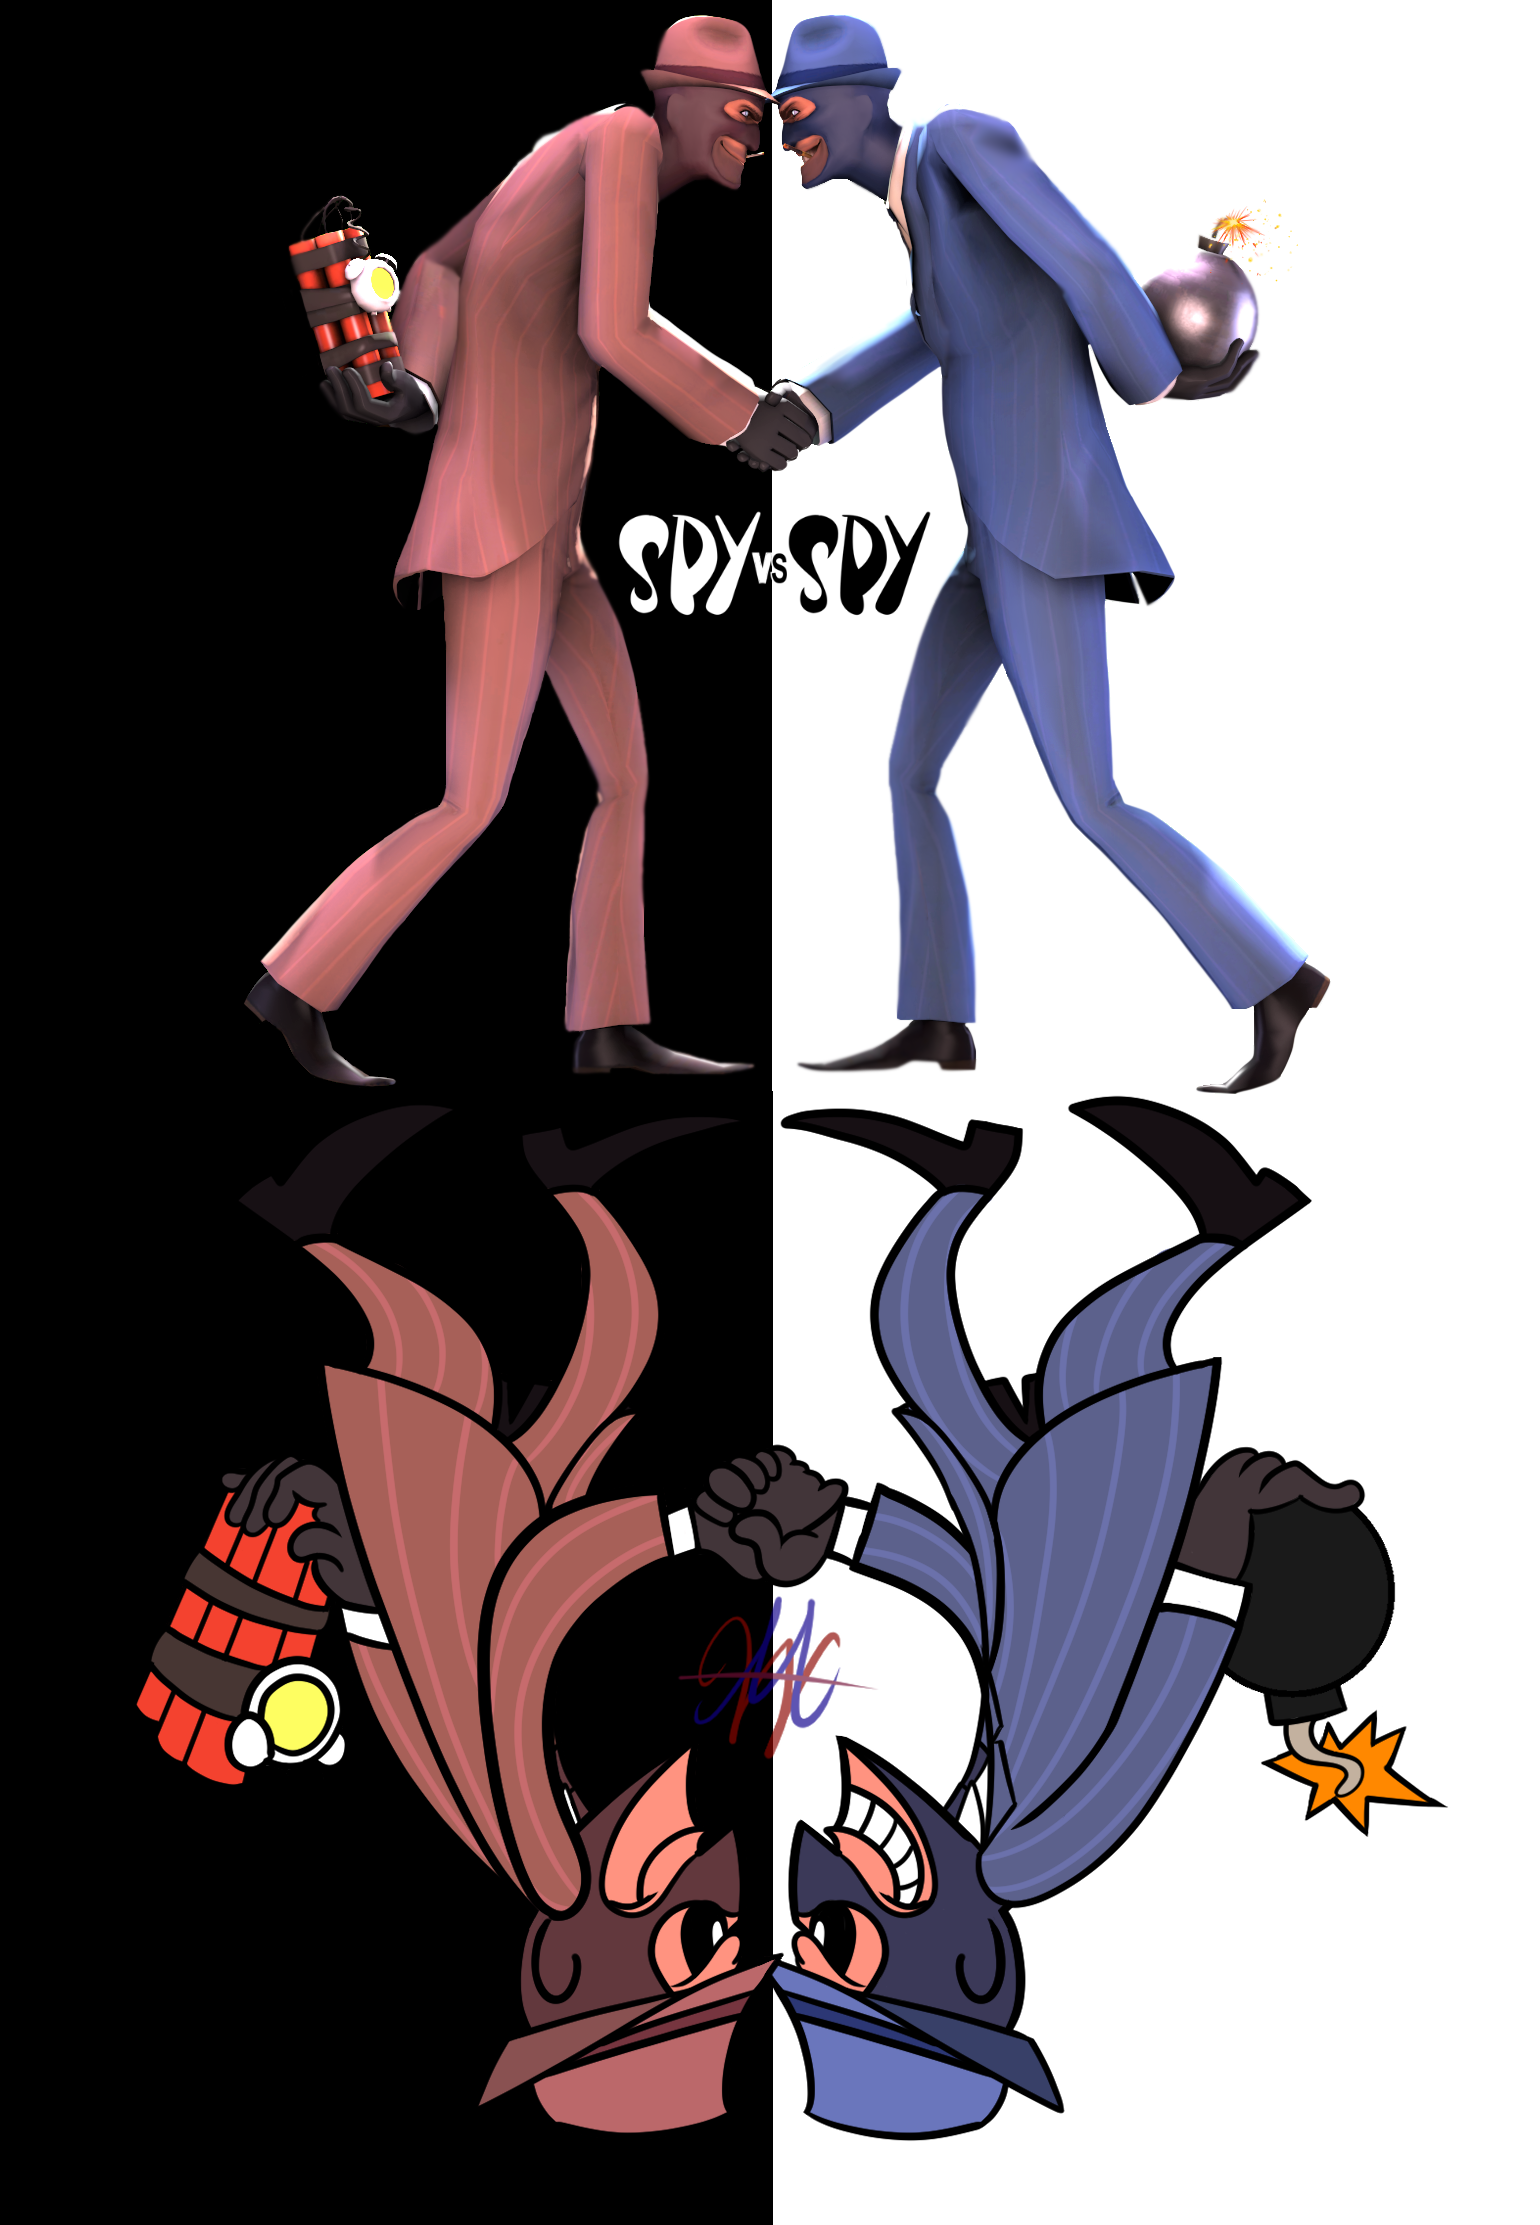 1572442713_Spy vs Spy high wip and color and cartoon.png